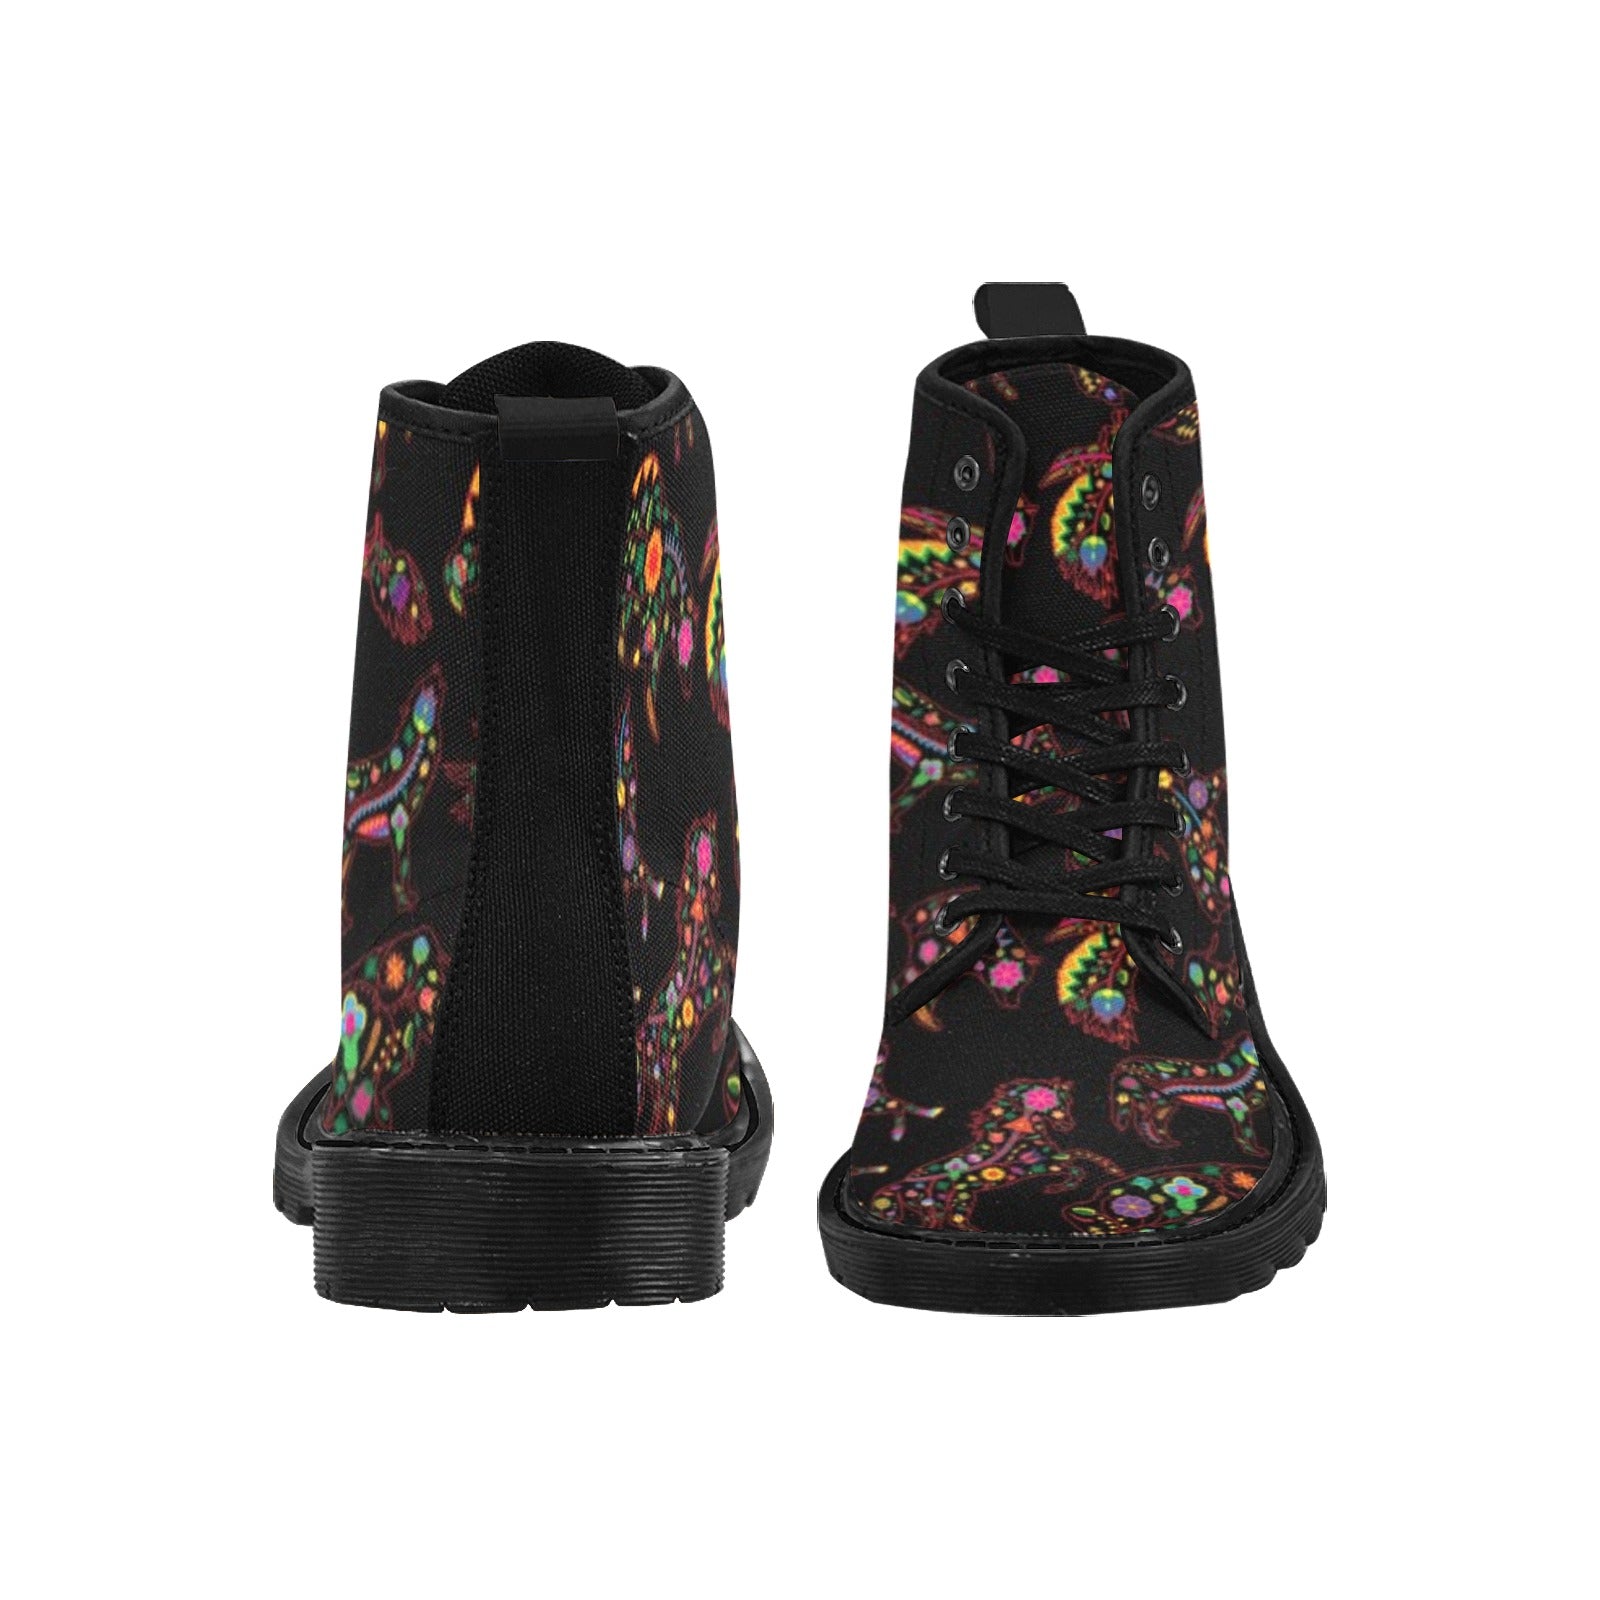 Neon Floral Animals Boots for Women (Black)